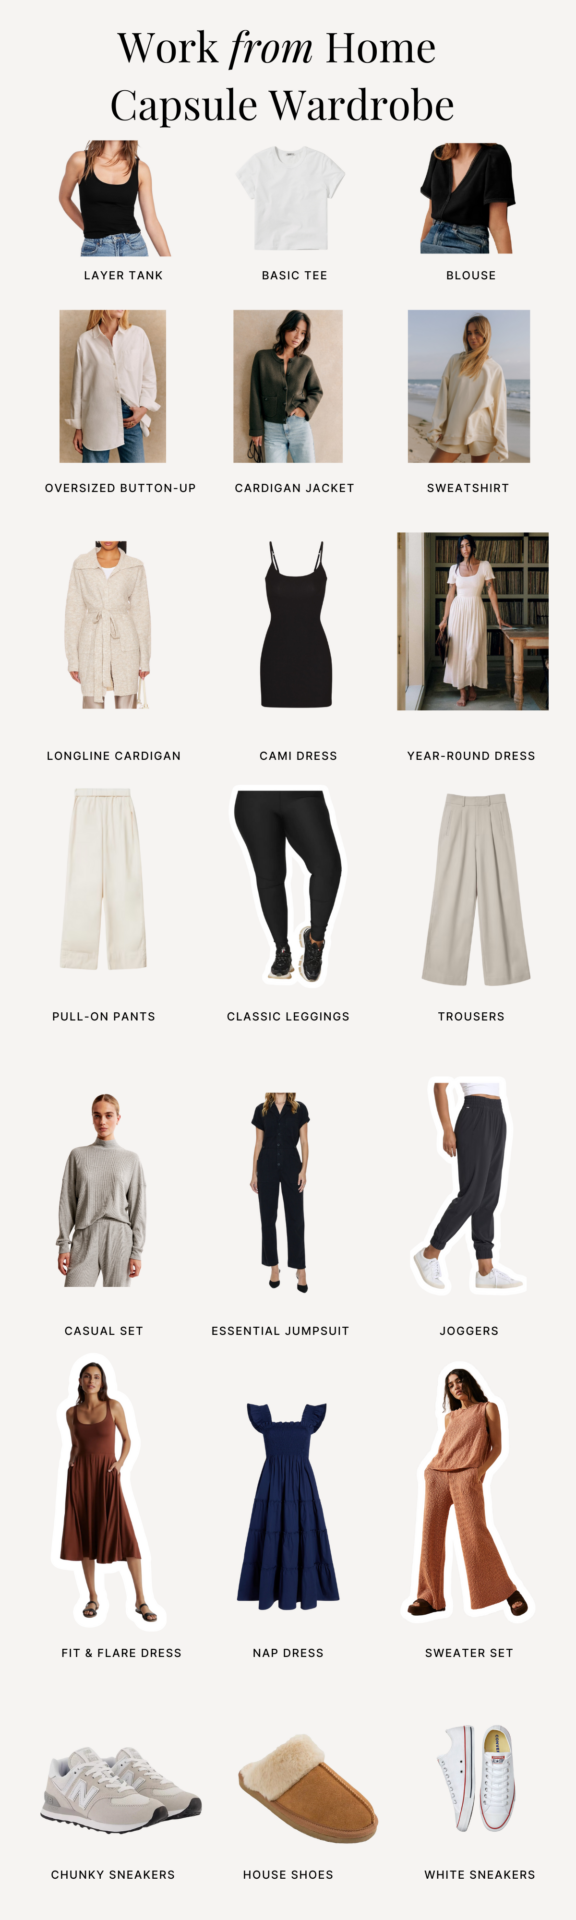 work from location capsule wardrobe